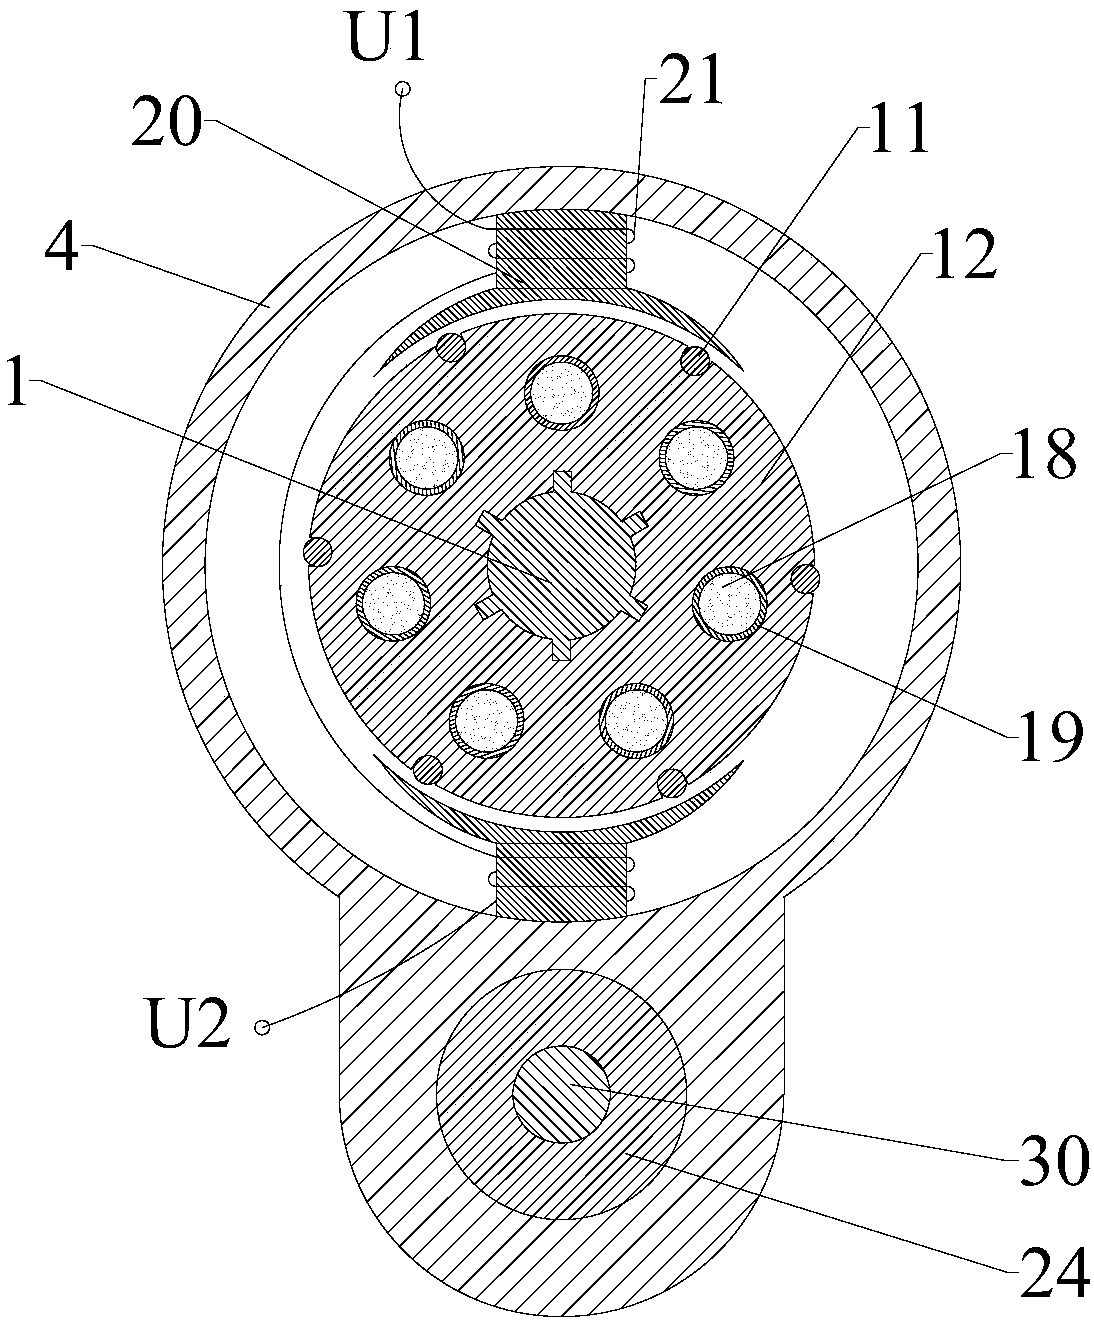 Inclined disk variable type electromechanical fluid coupler for direct current stator excitation